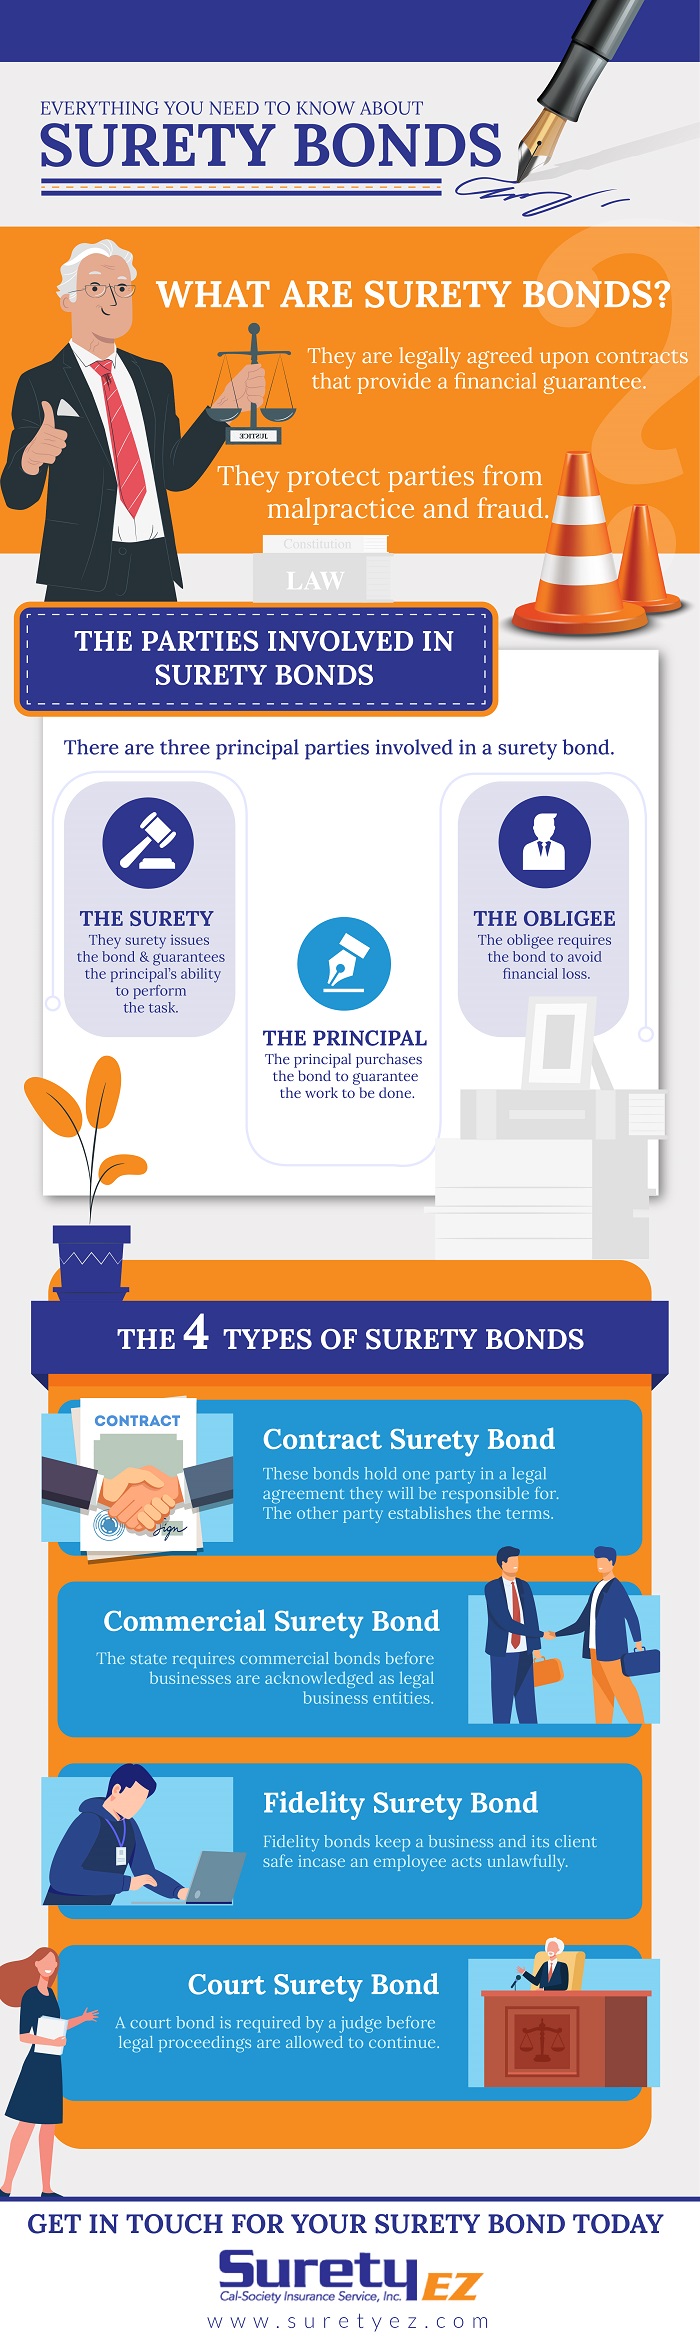 Everything You Need To Know About Surety Bonds